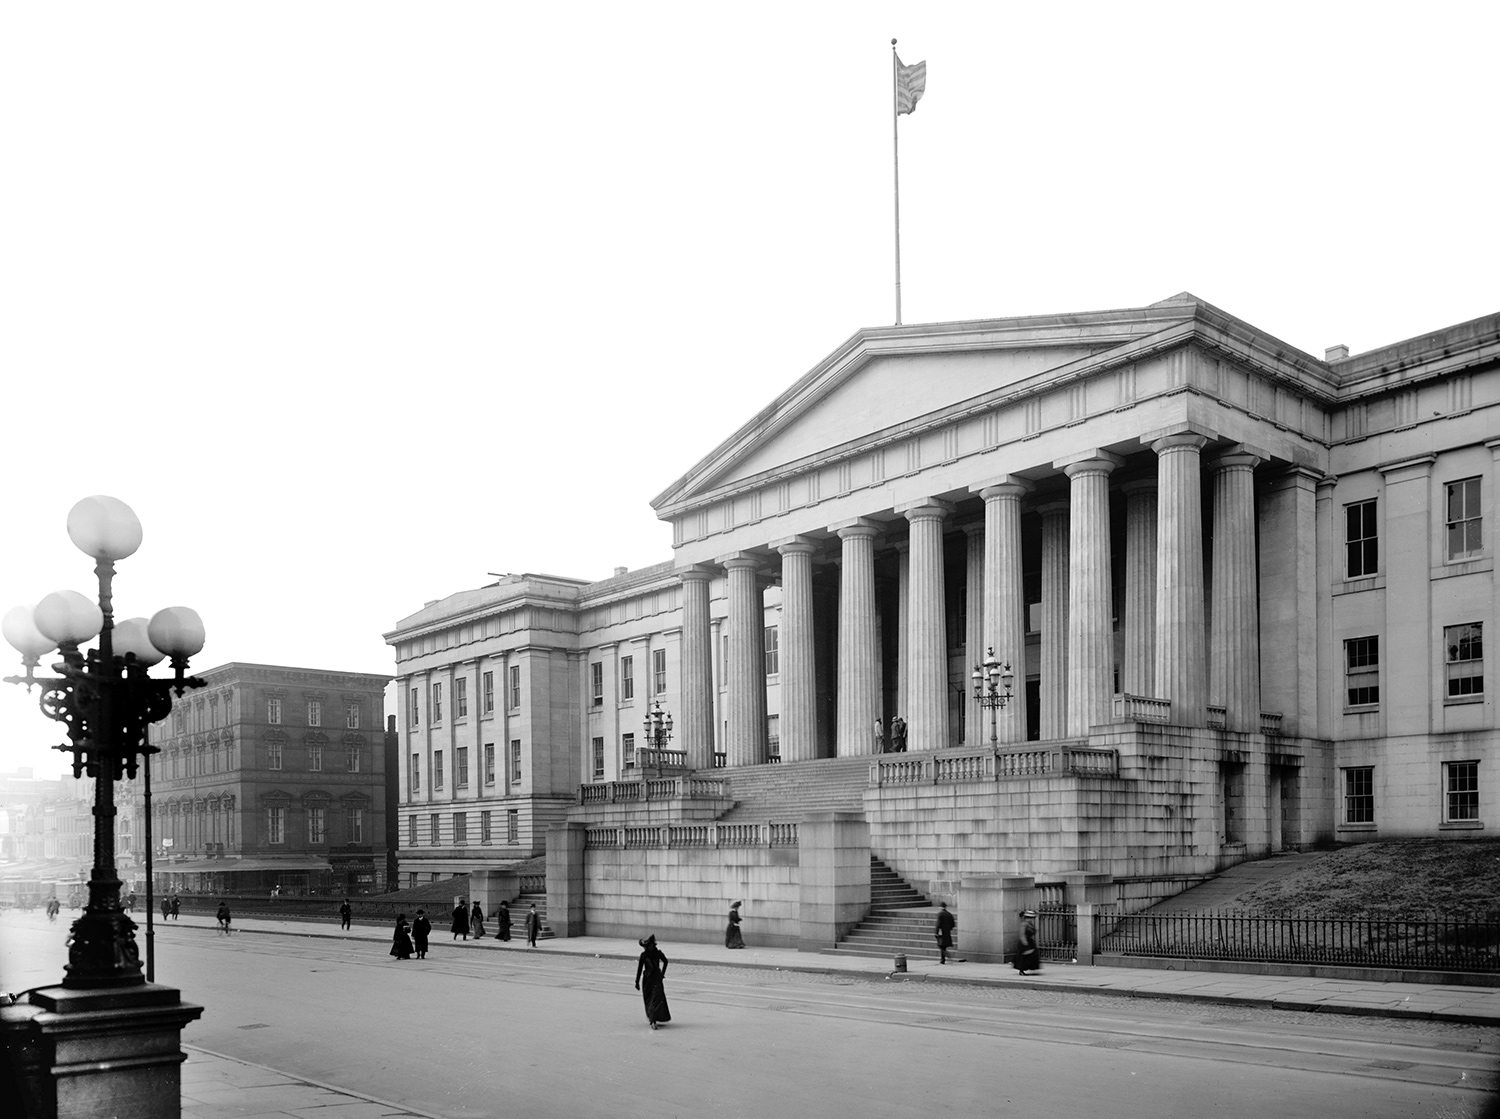 Black and white photo of a large government building with columns in the front and an American flag waving on the roof